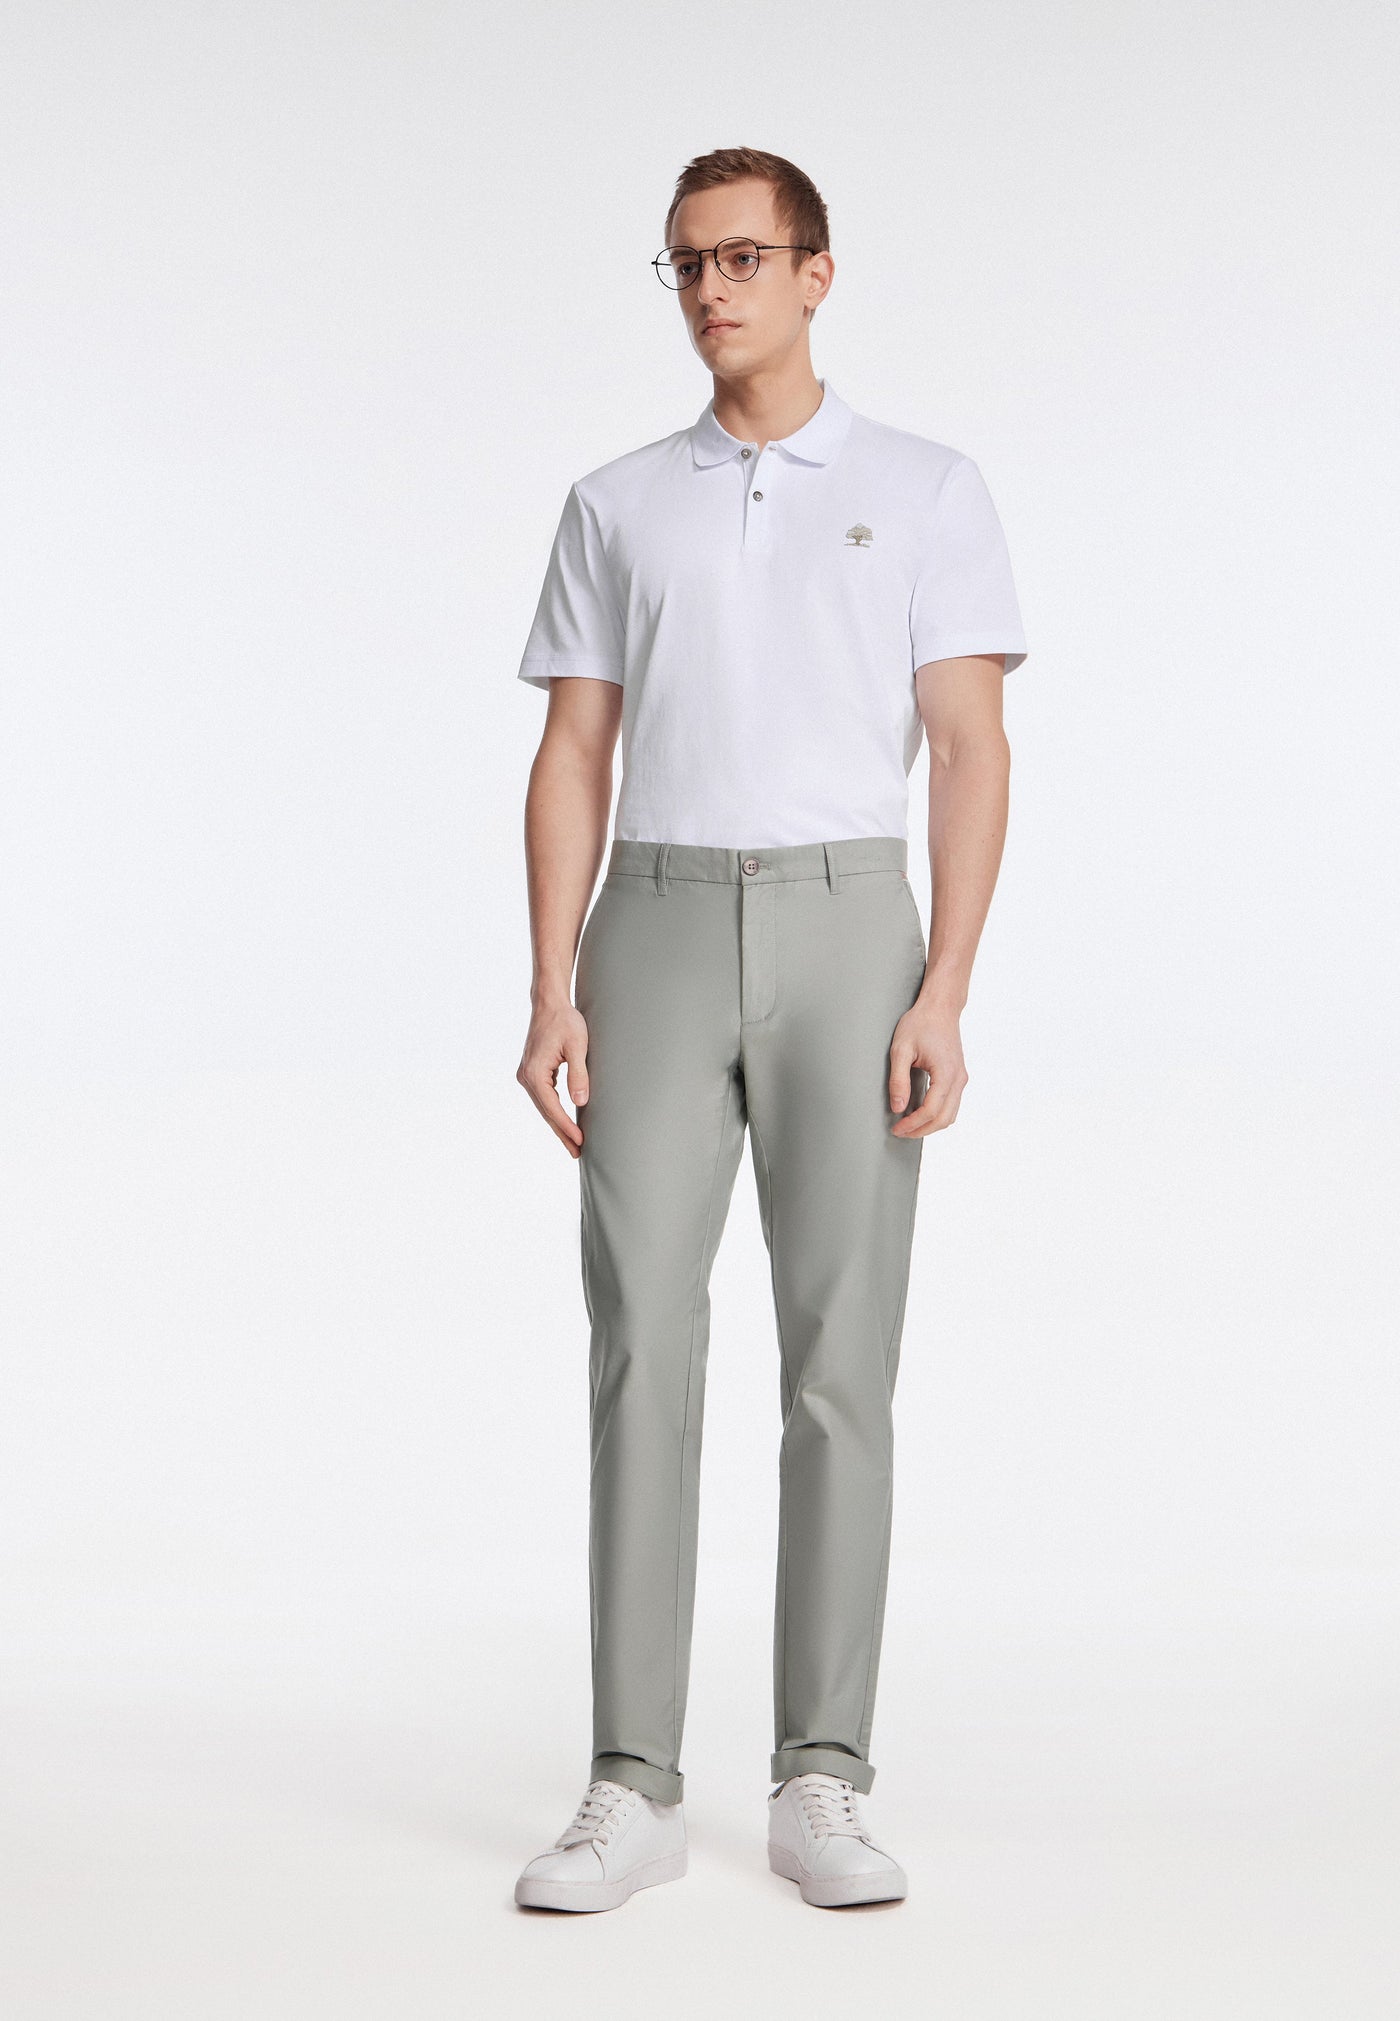 Mencody - Soft Cotton Rich Causal Pants Extra Slim Fit